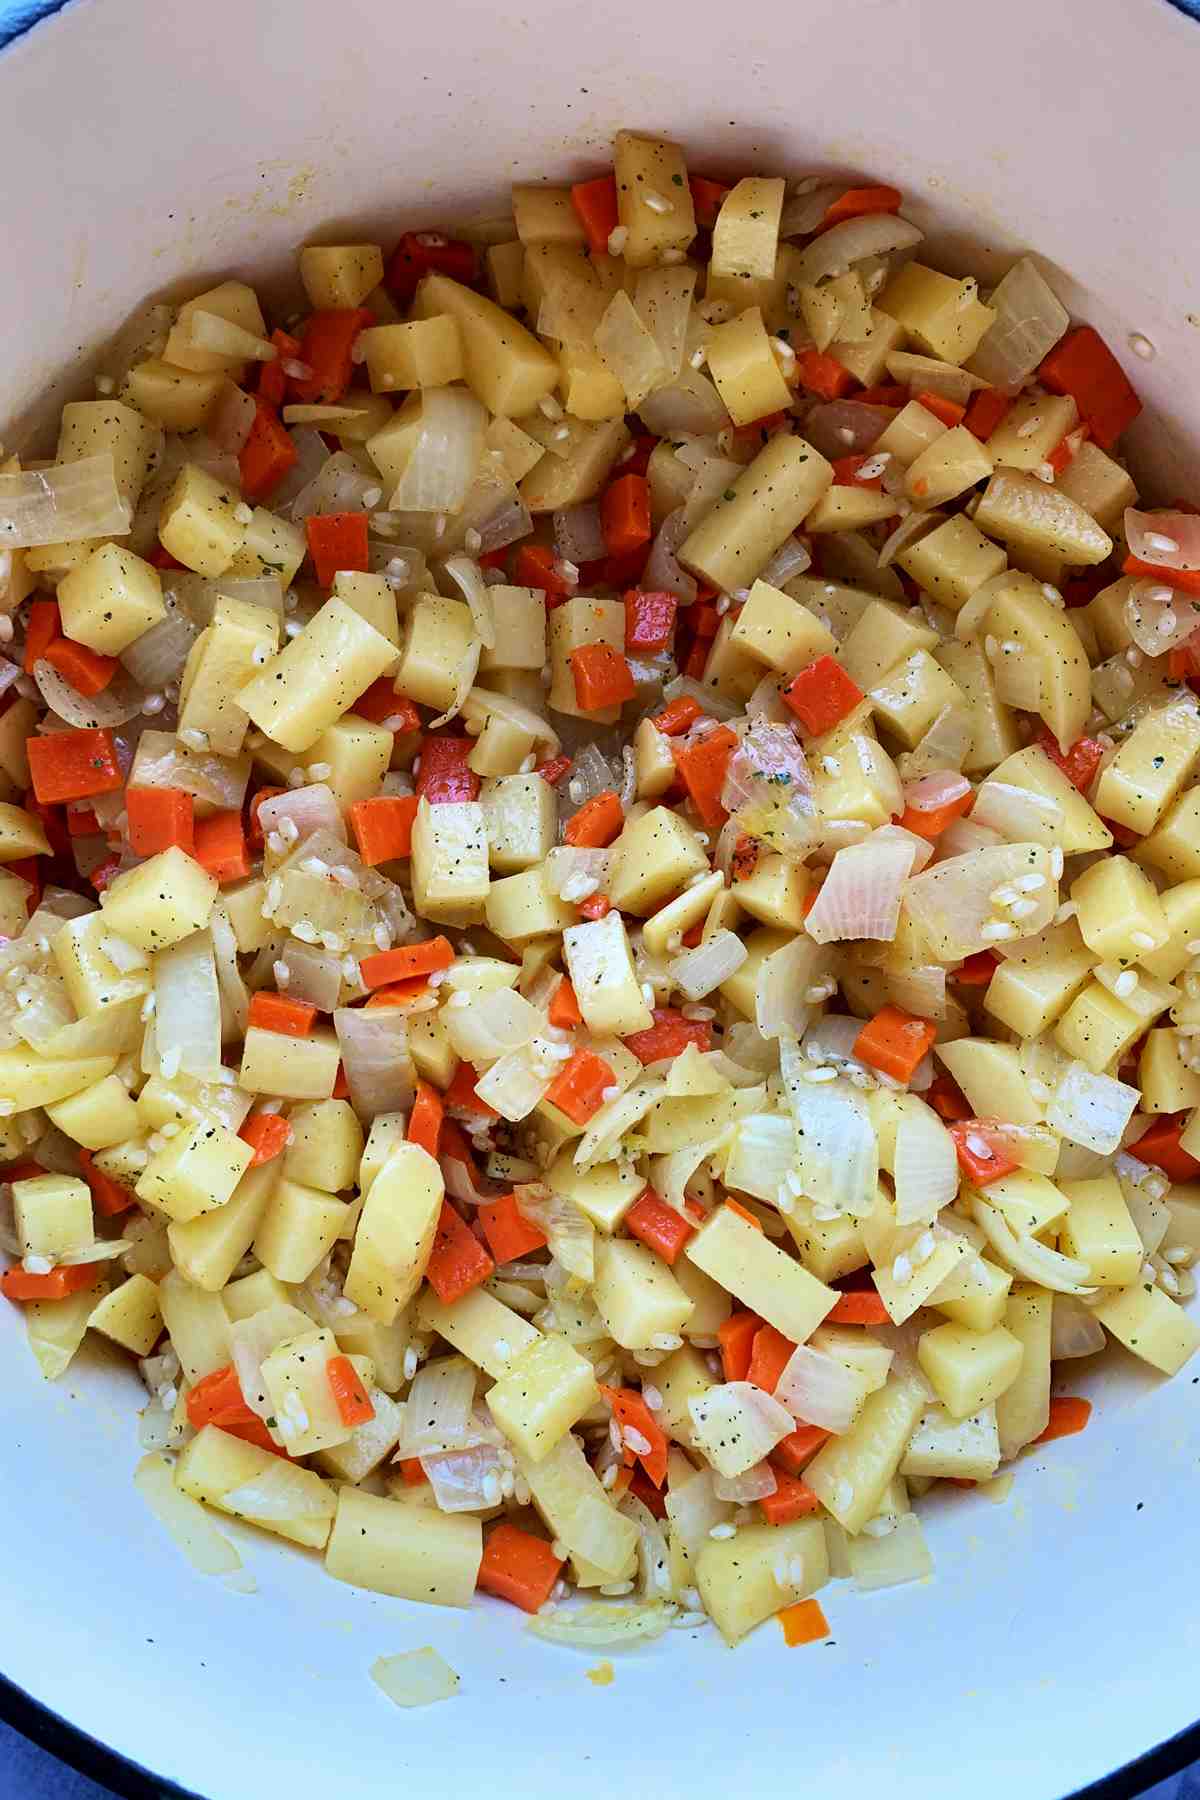 Chopped vegetables in dutch oven.